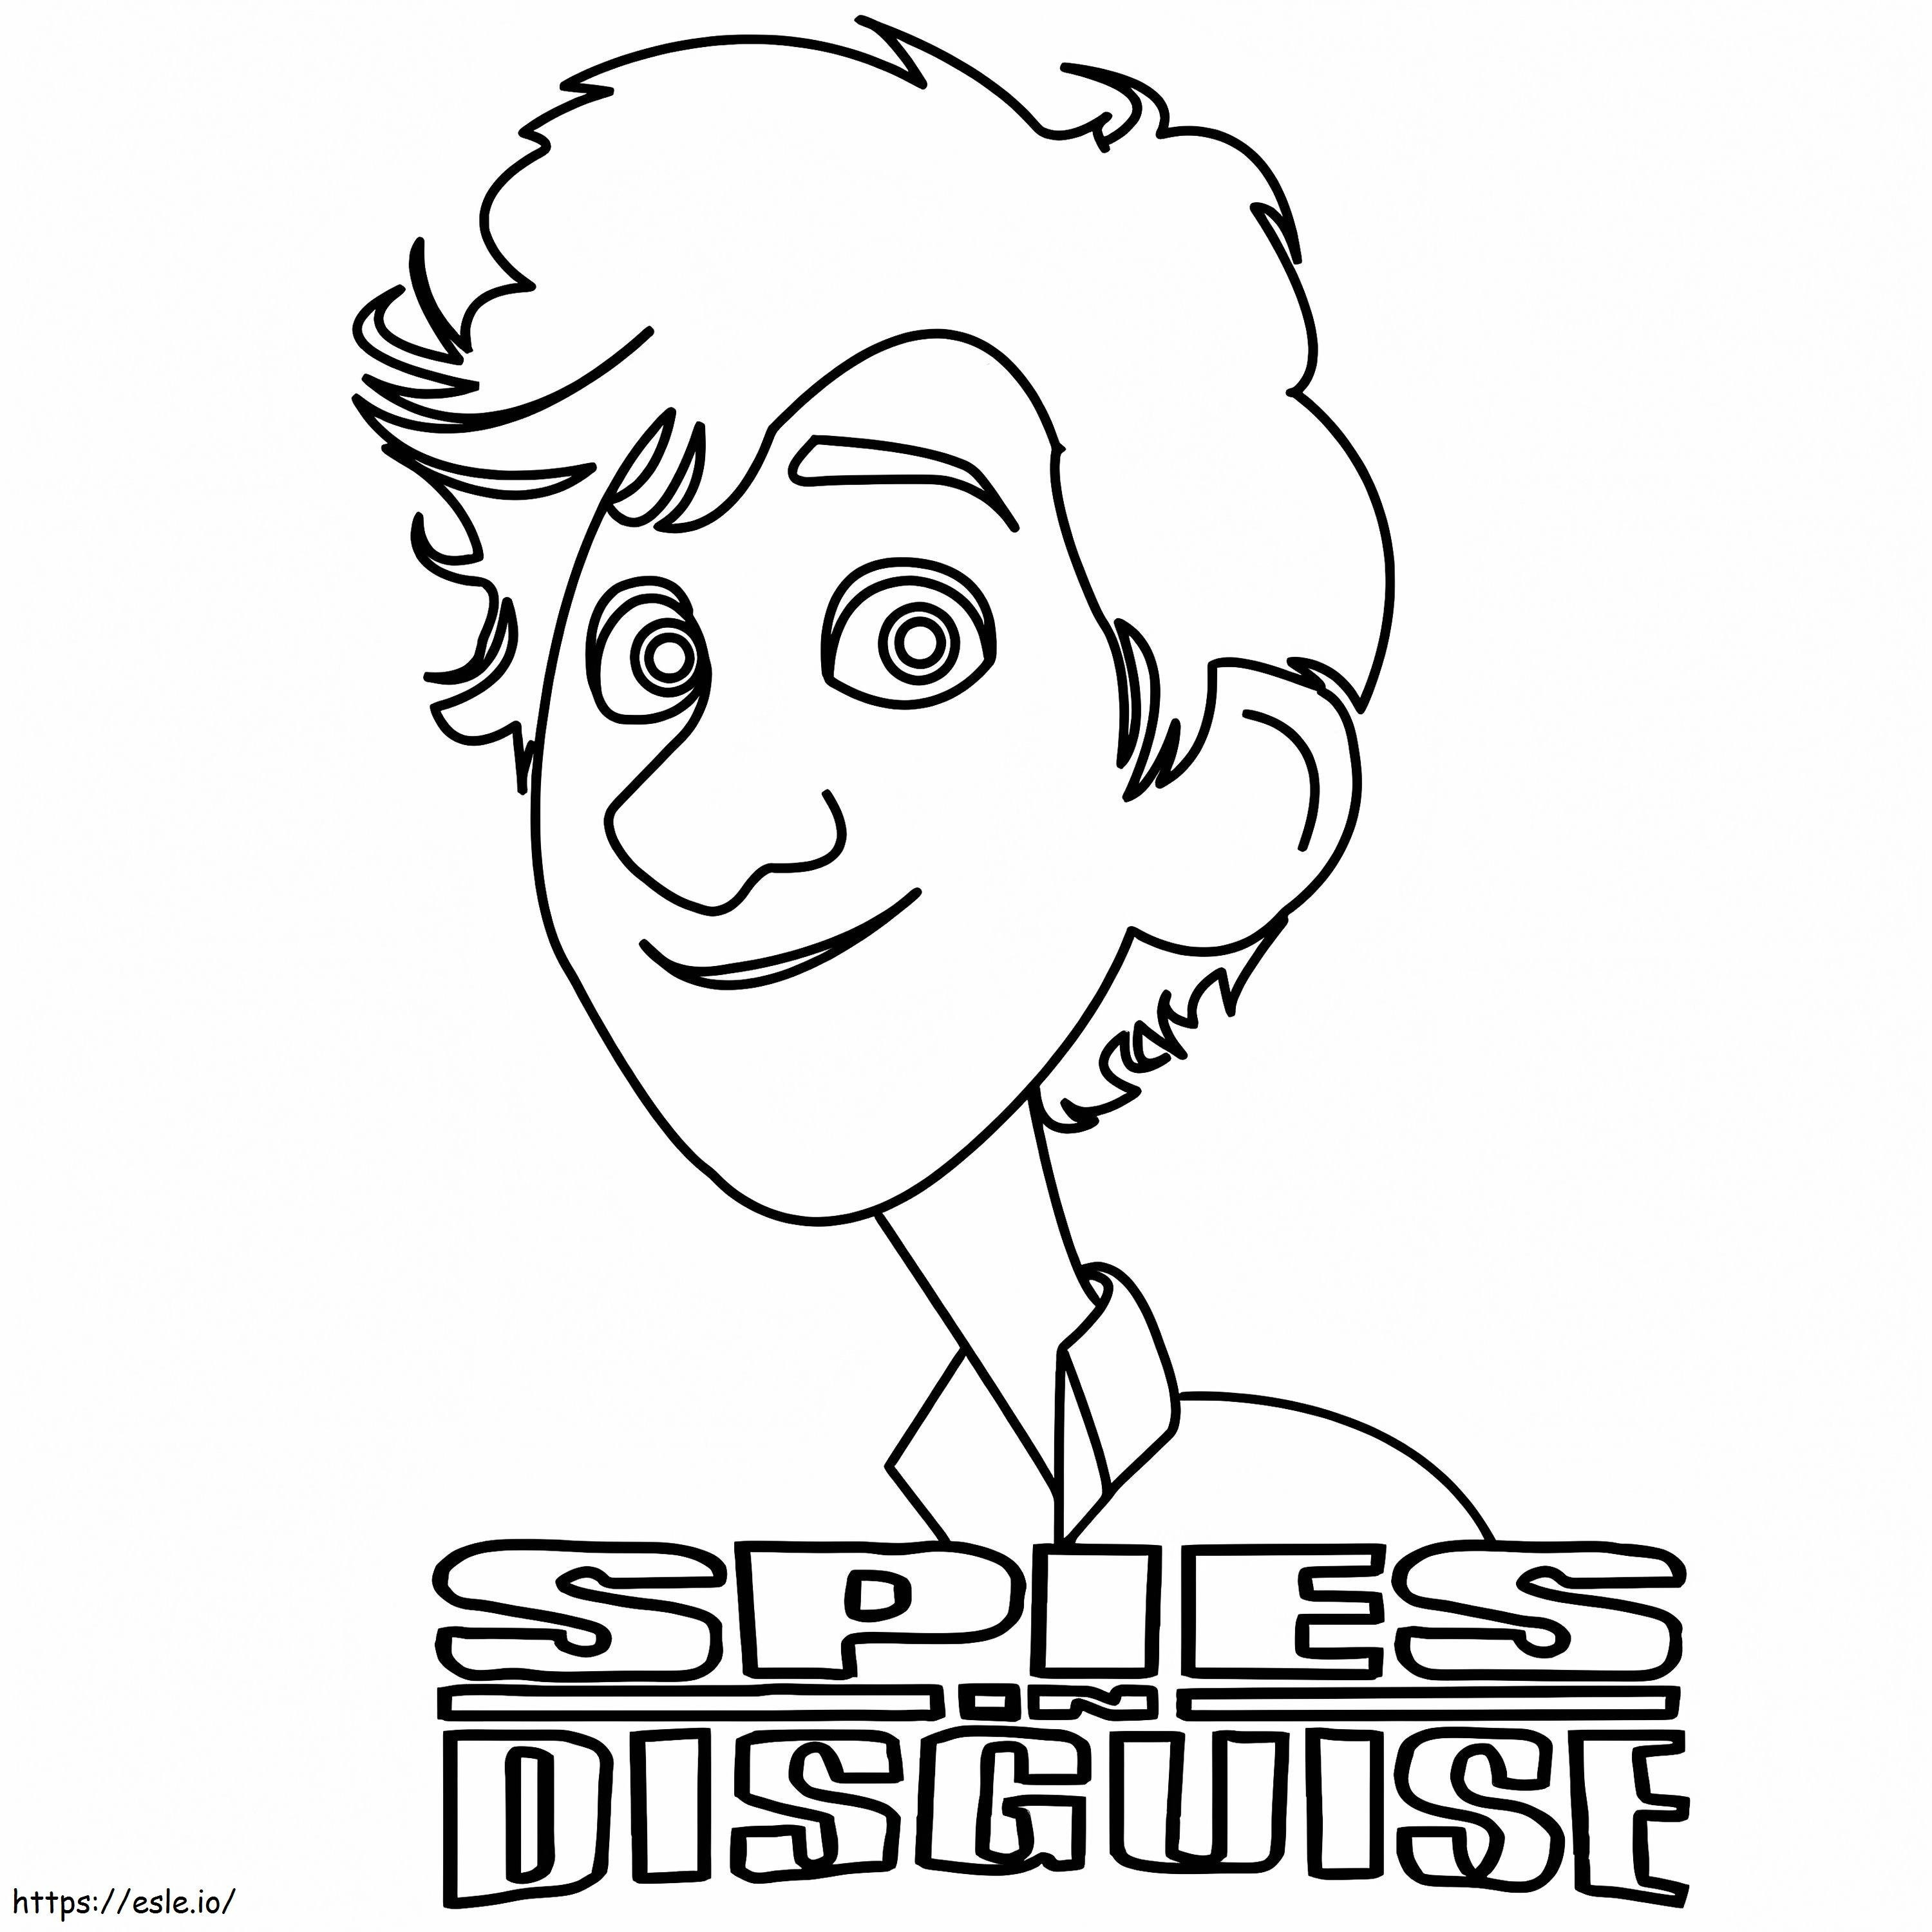 Walter Spies In Disguise coloring page